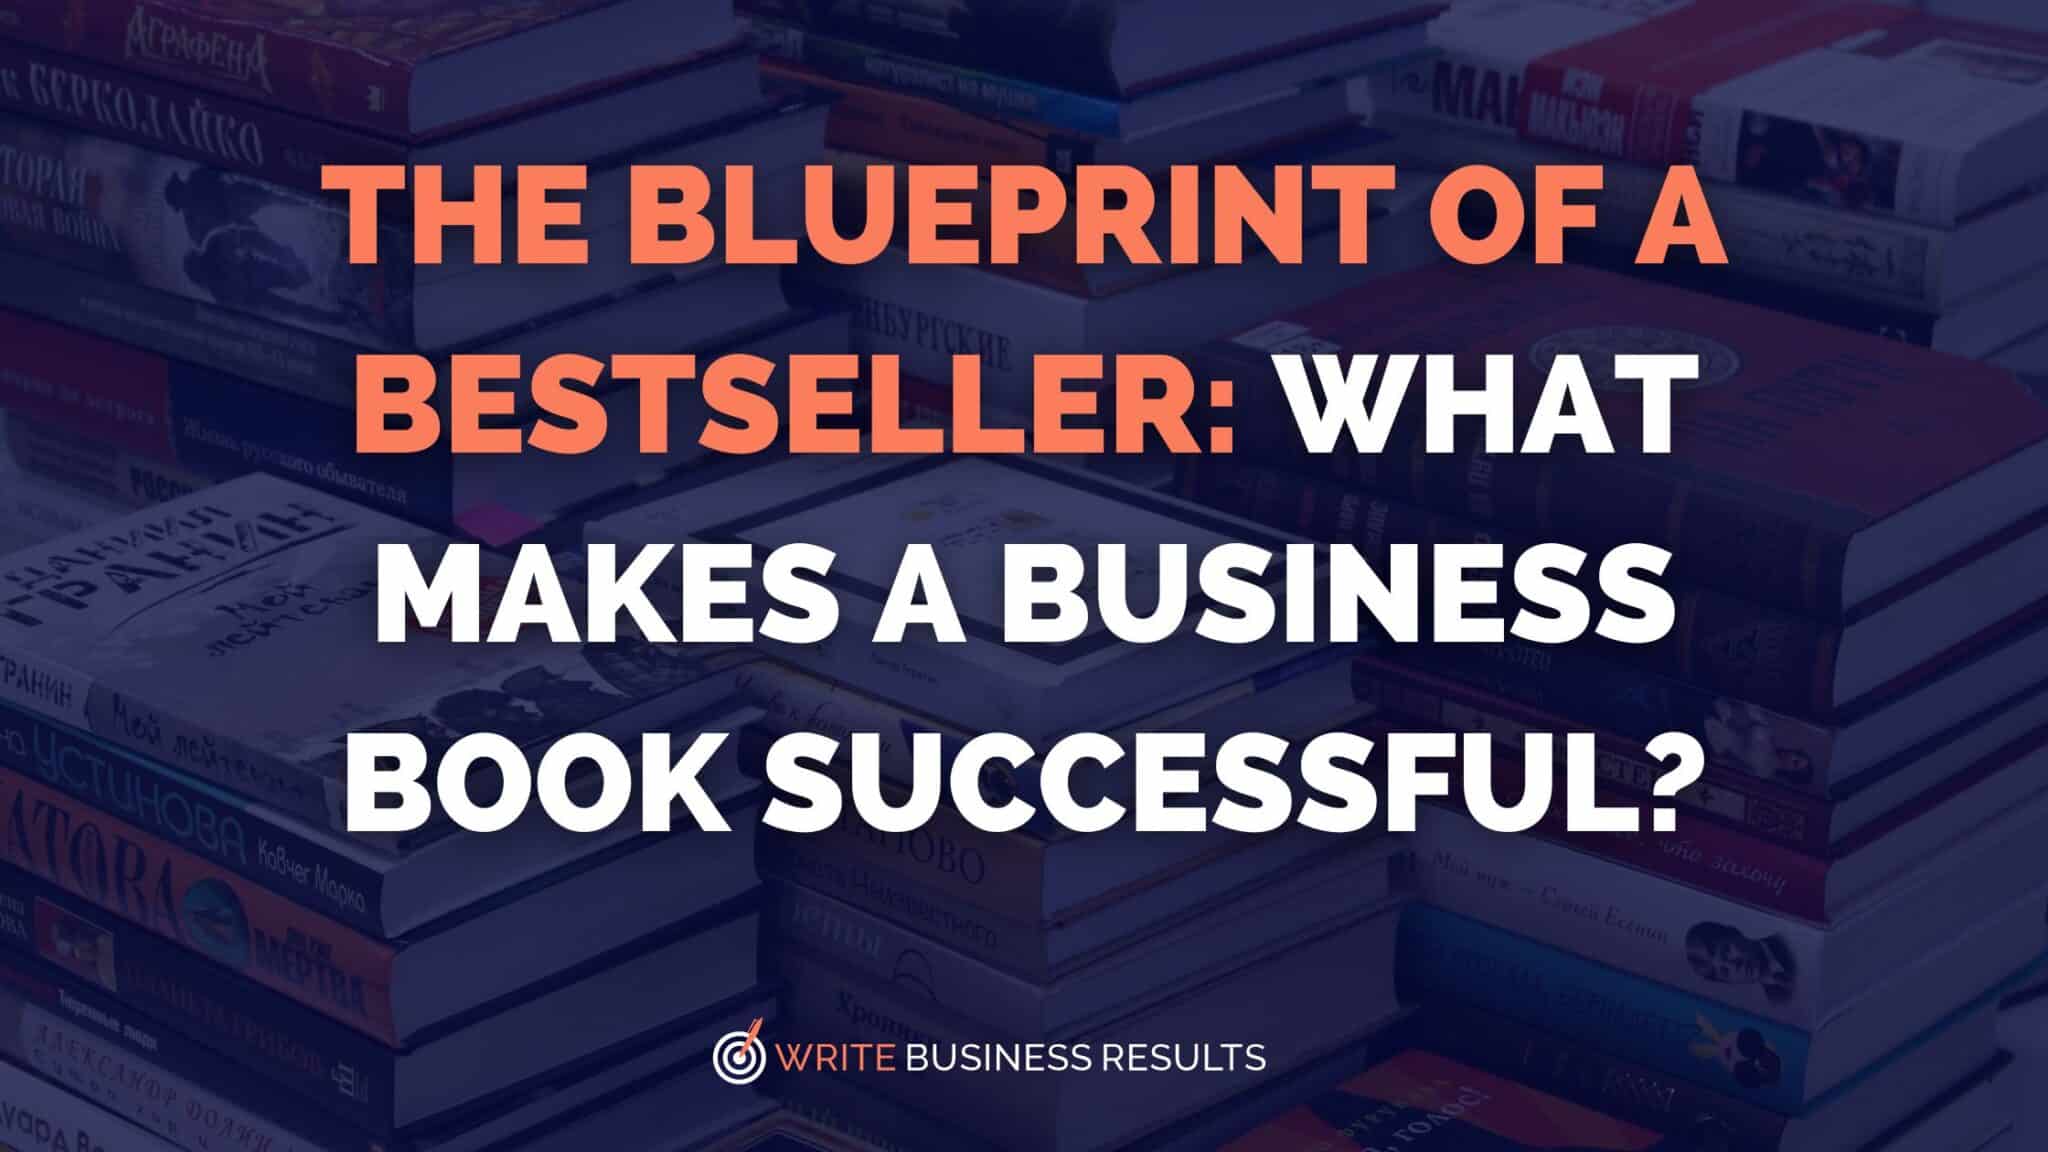 The Blueprint of a Bestseller: What Makes A Business Book Successful?